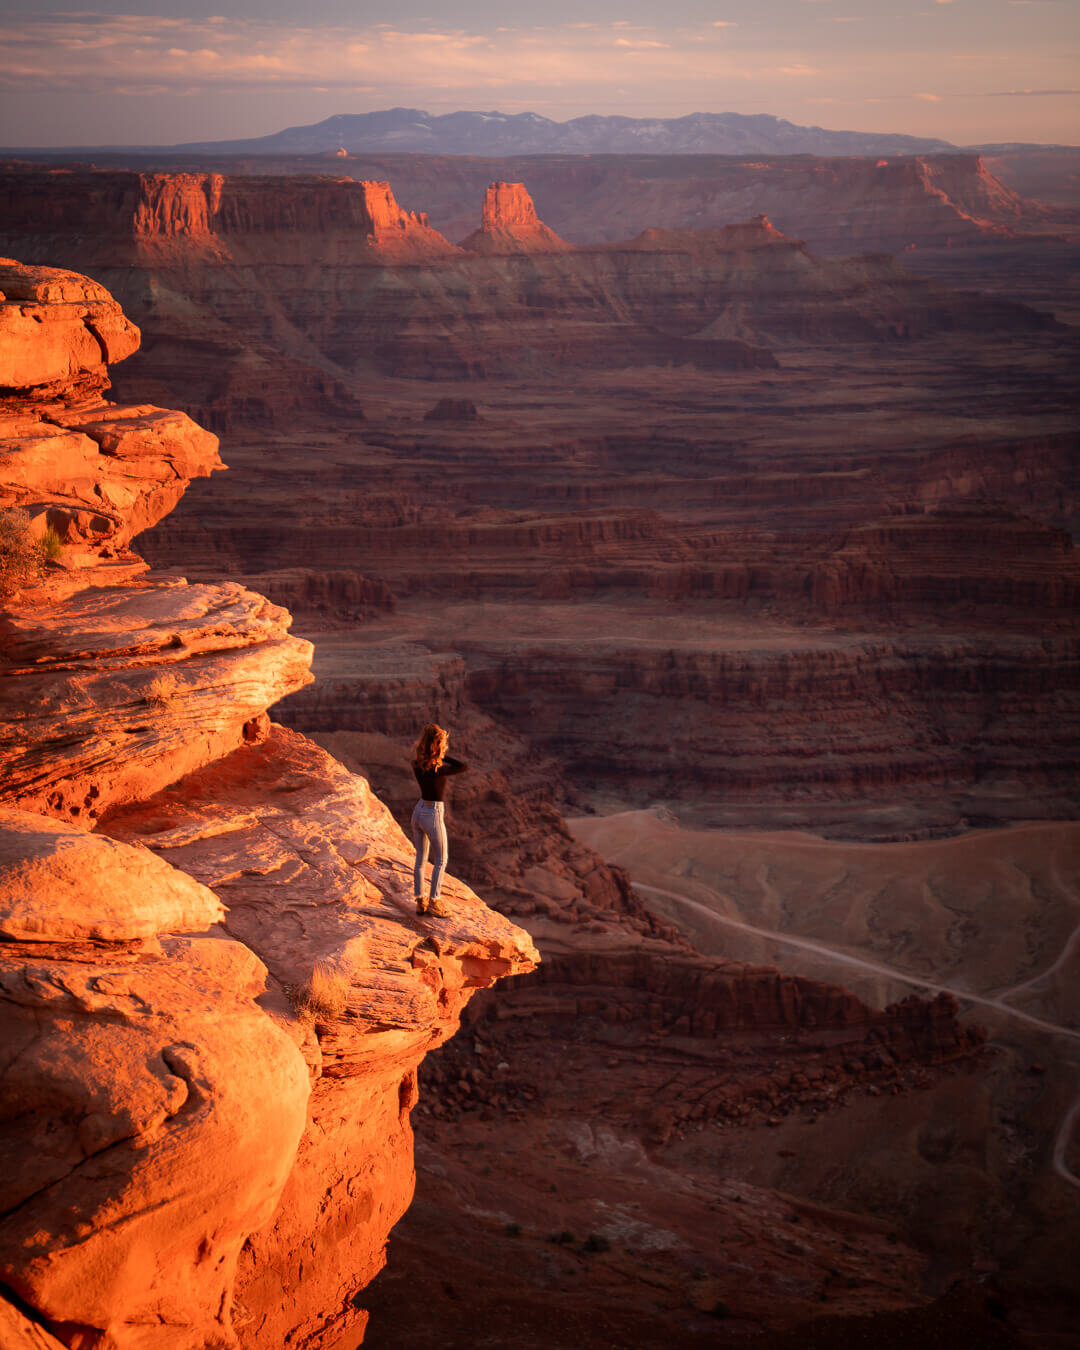 The expansive views at Dead Horse Point State Park just outside of Moab, Utah.